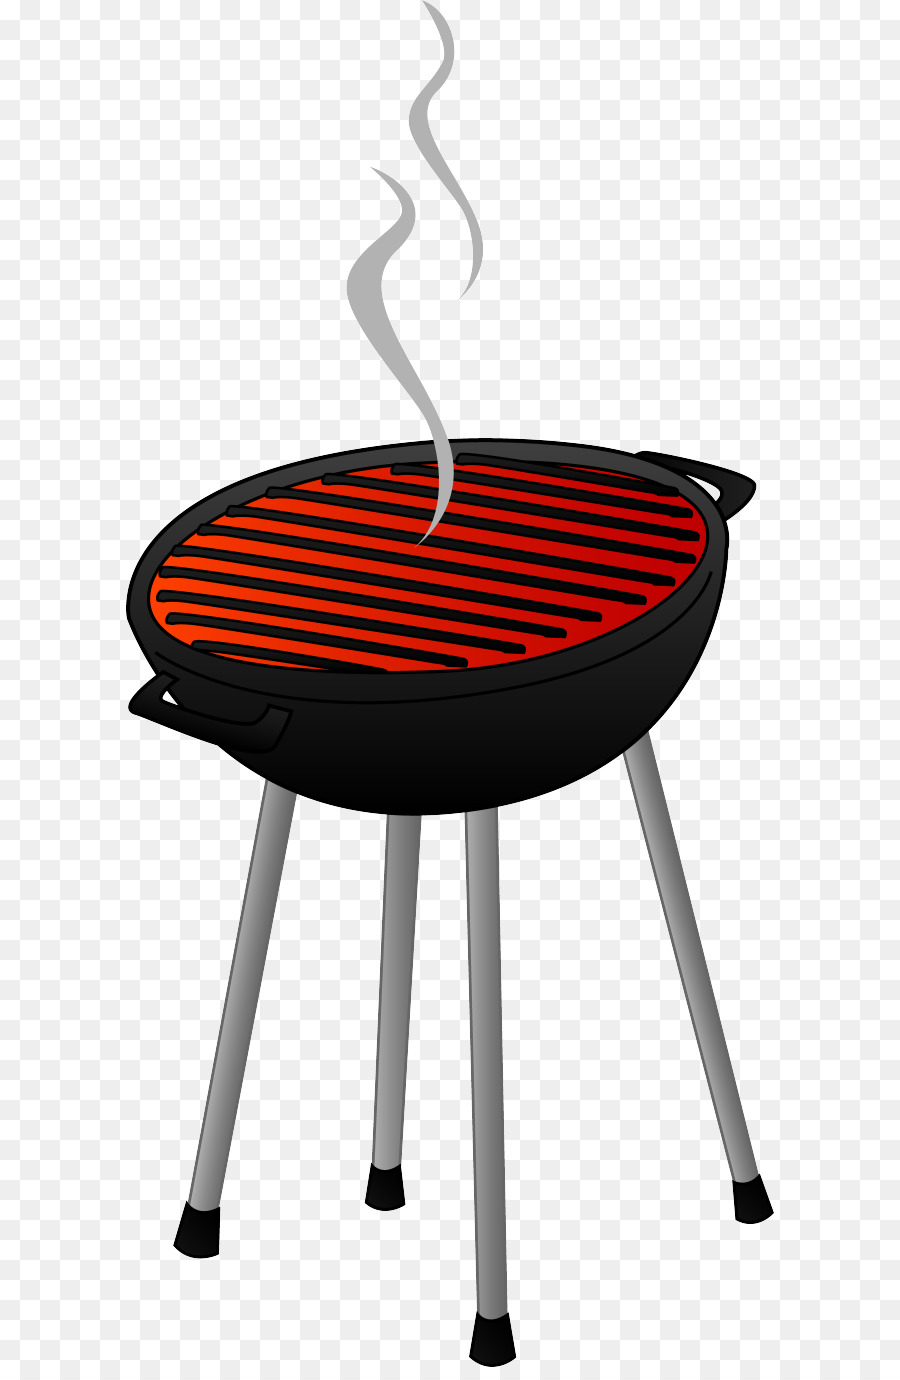 Grill clipart fall. Table cartoon barbecue furniture